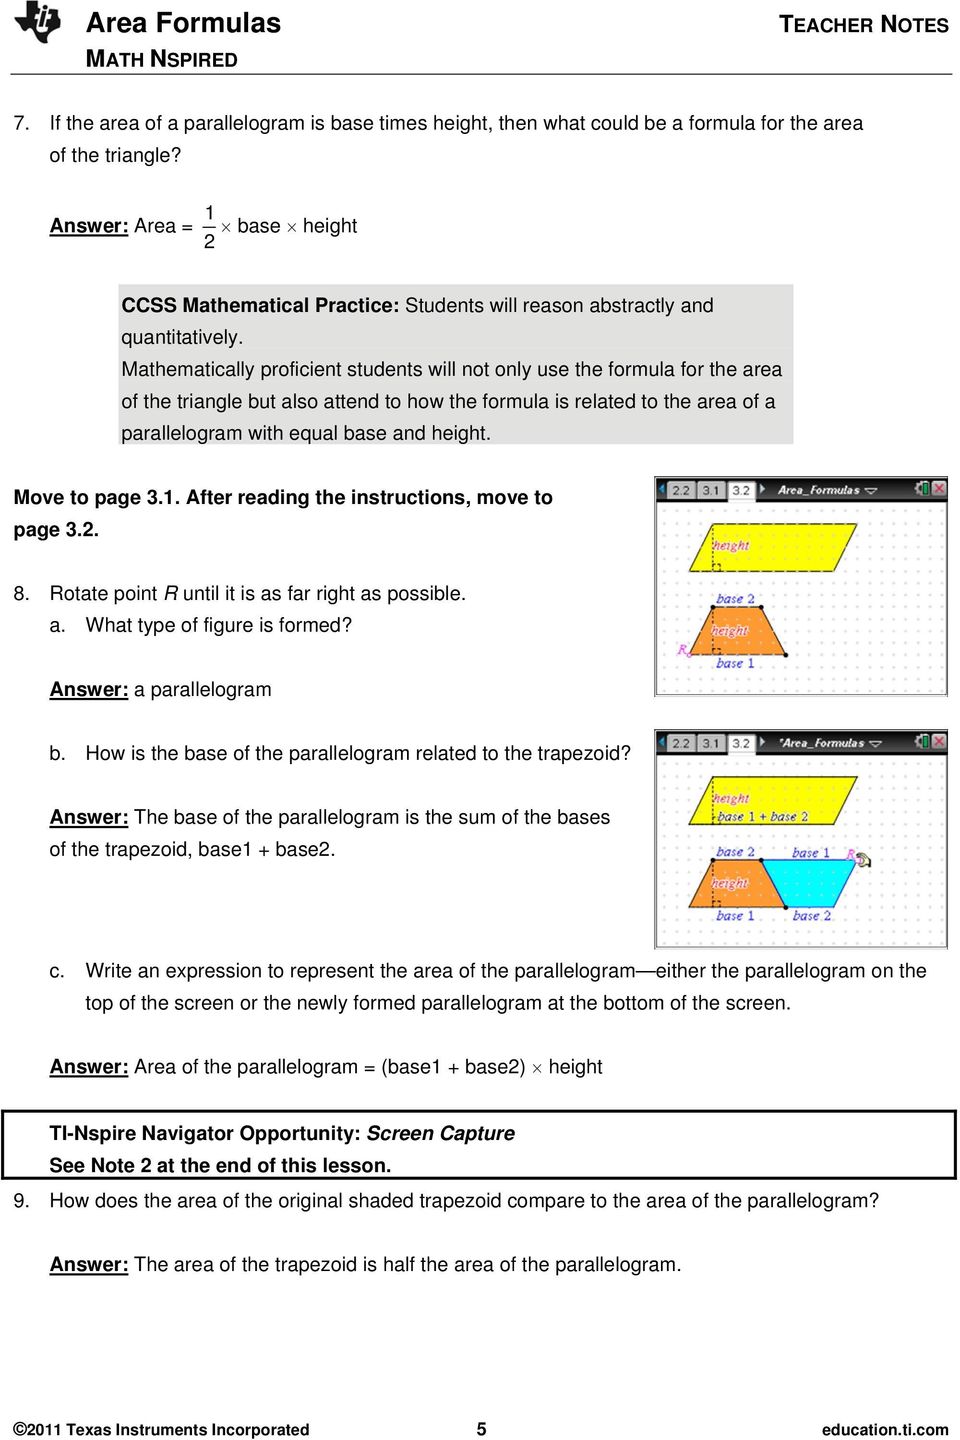 Mathematically proficient students will not only use the formula for the area of the triangle but also attend to how the formula is related to the area of a parallelogram with equal base and height.